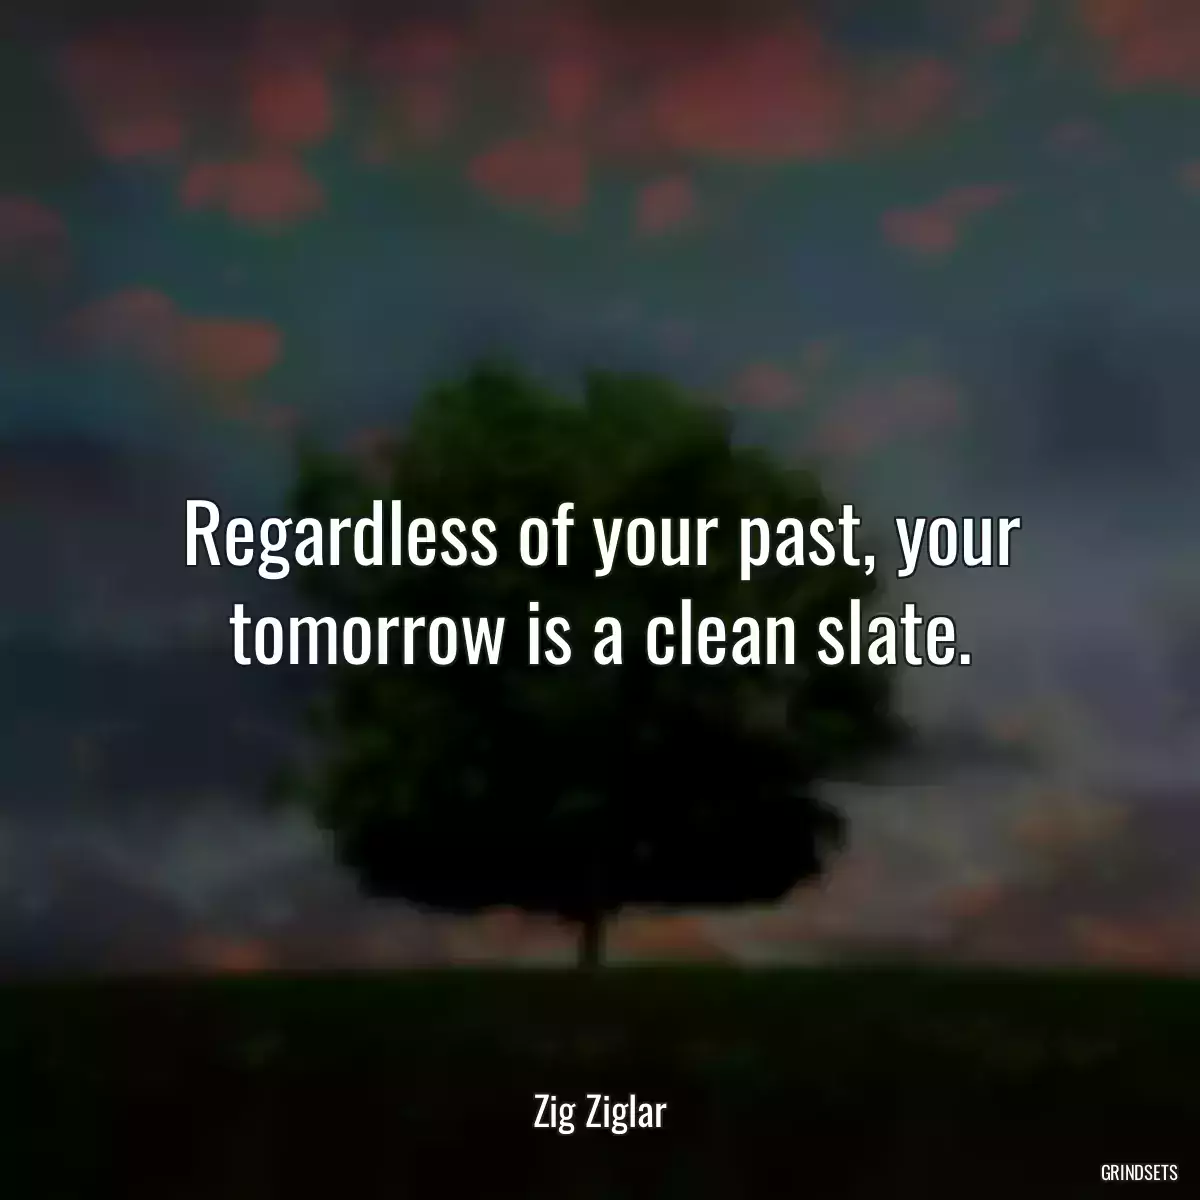 Regardless of your past, your tomorrow is a clean slate.